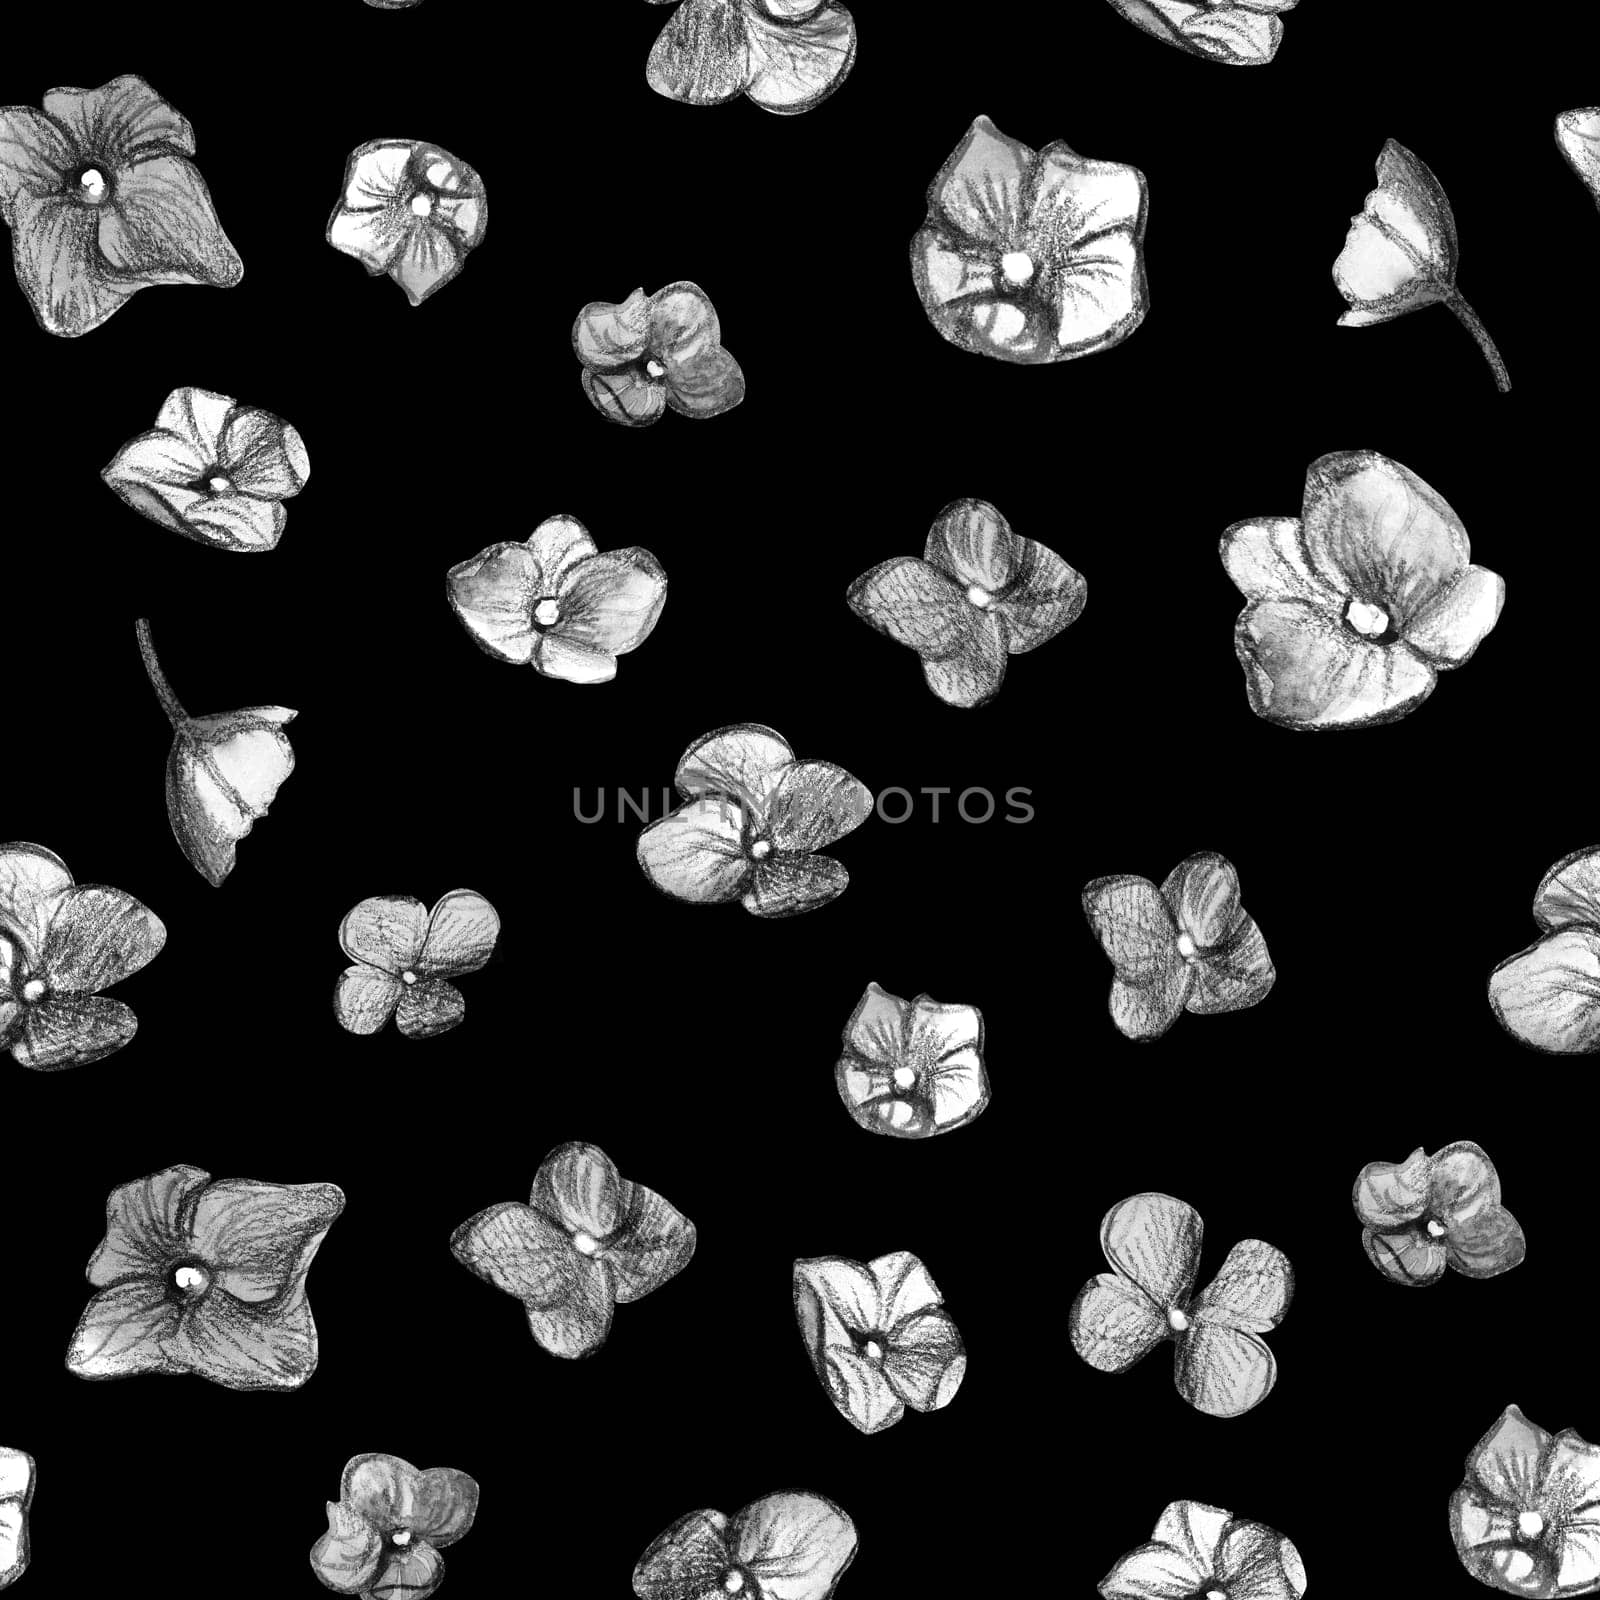 Black and white monochrome seamless botanical pattern with small flowers drawn in pencil and watercolor on a black background for textile and surface design